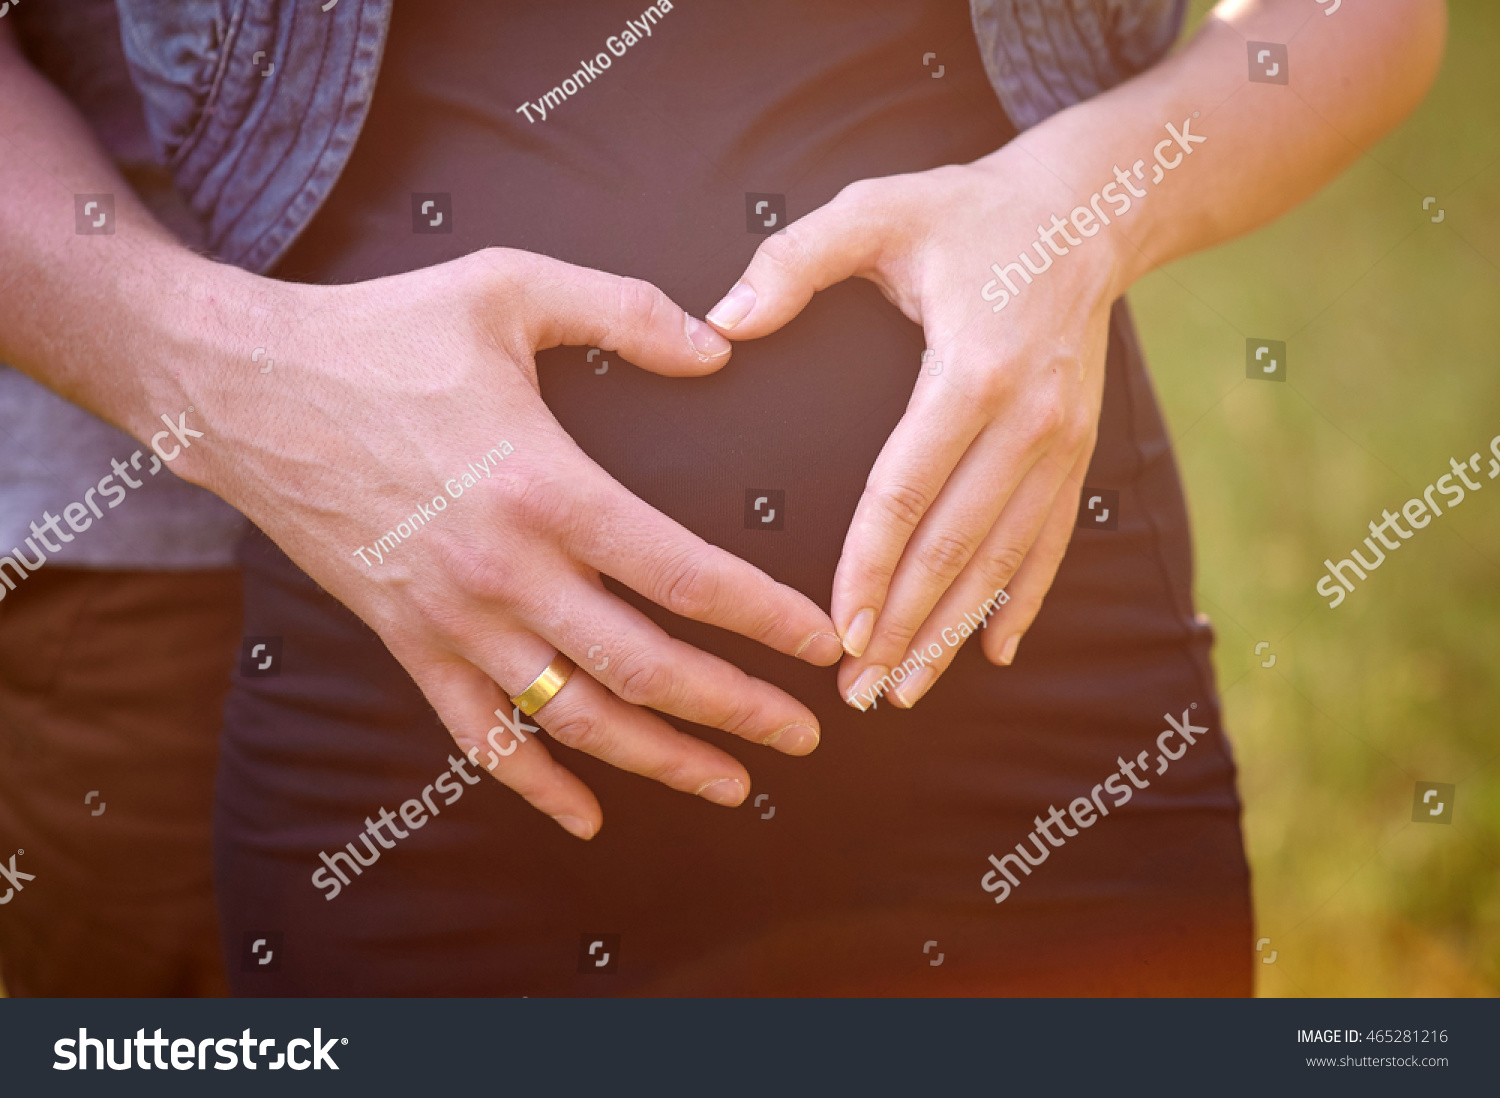 Pregnant Belly with fingers of husband Heart symbol #465281216